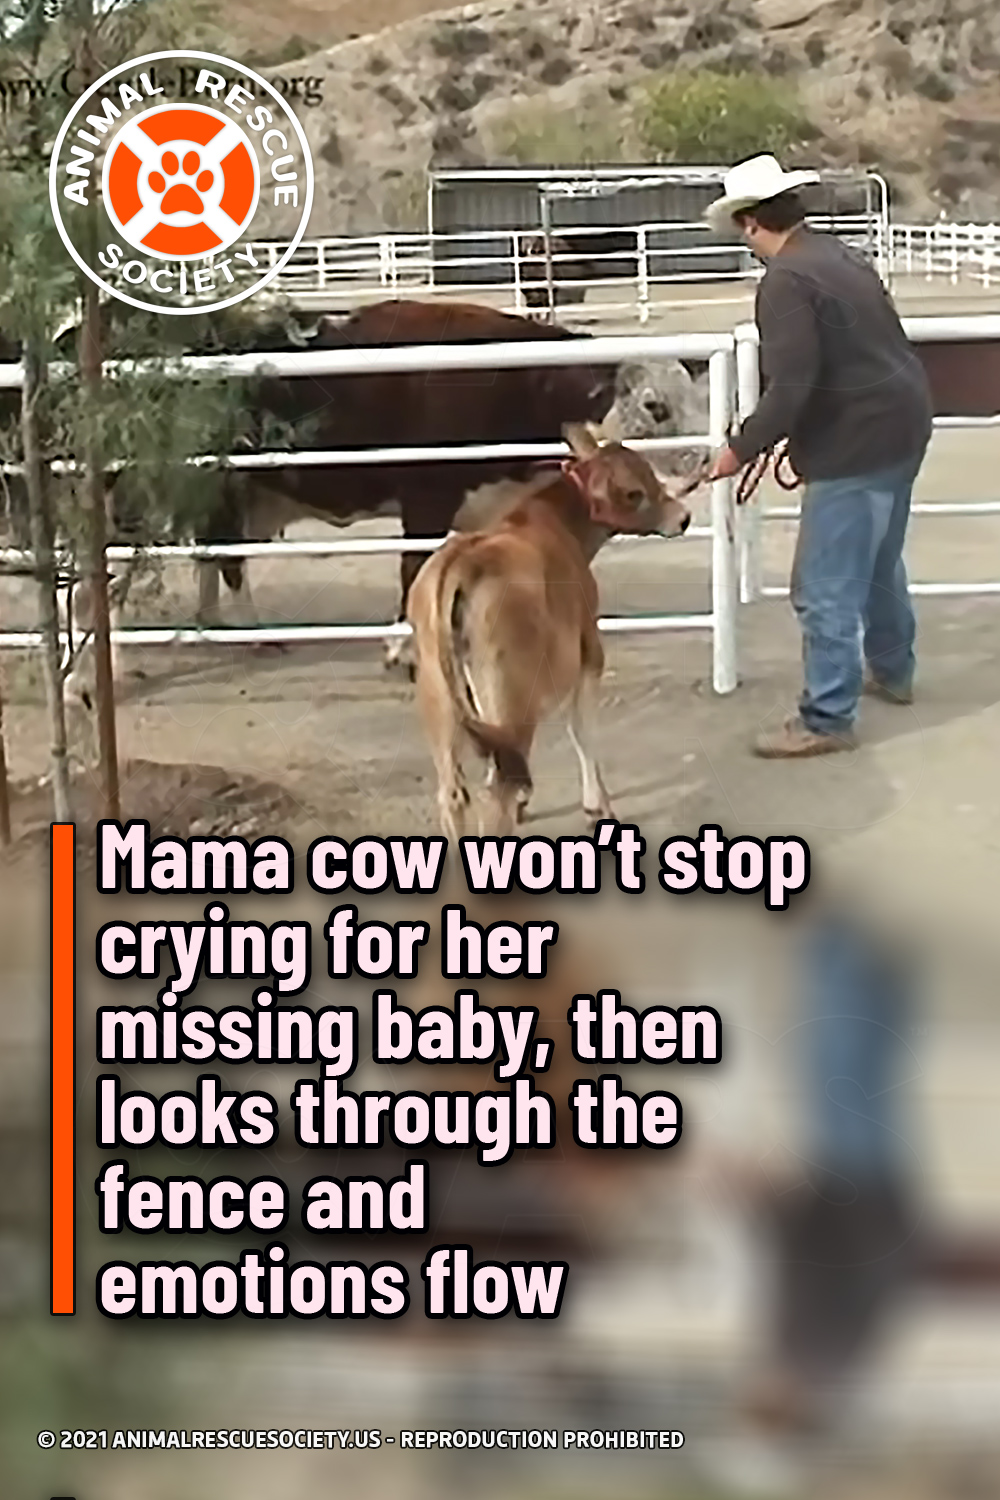 Mama cow won’t stop crying for her missing baby, then looks through the fence and emotions flow